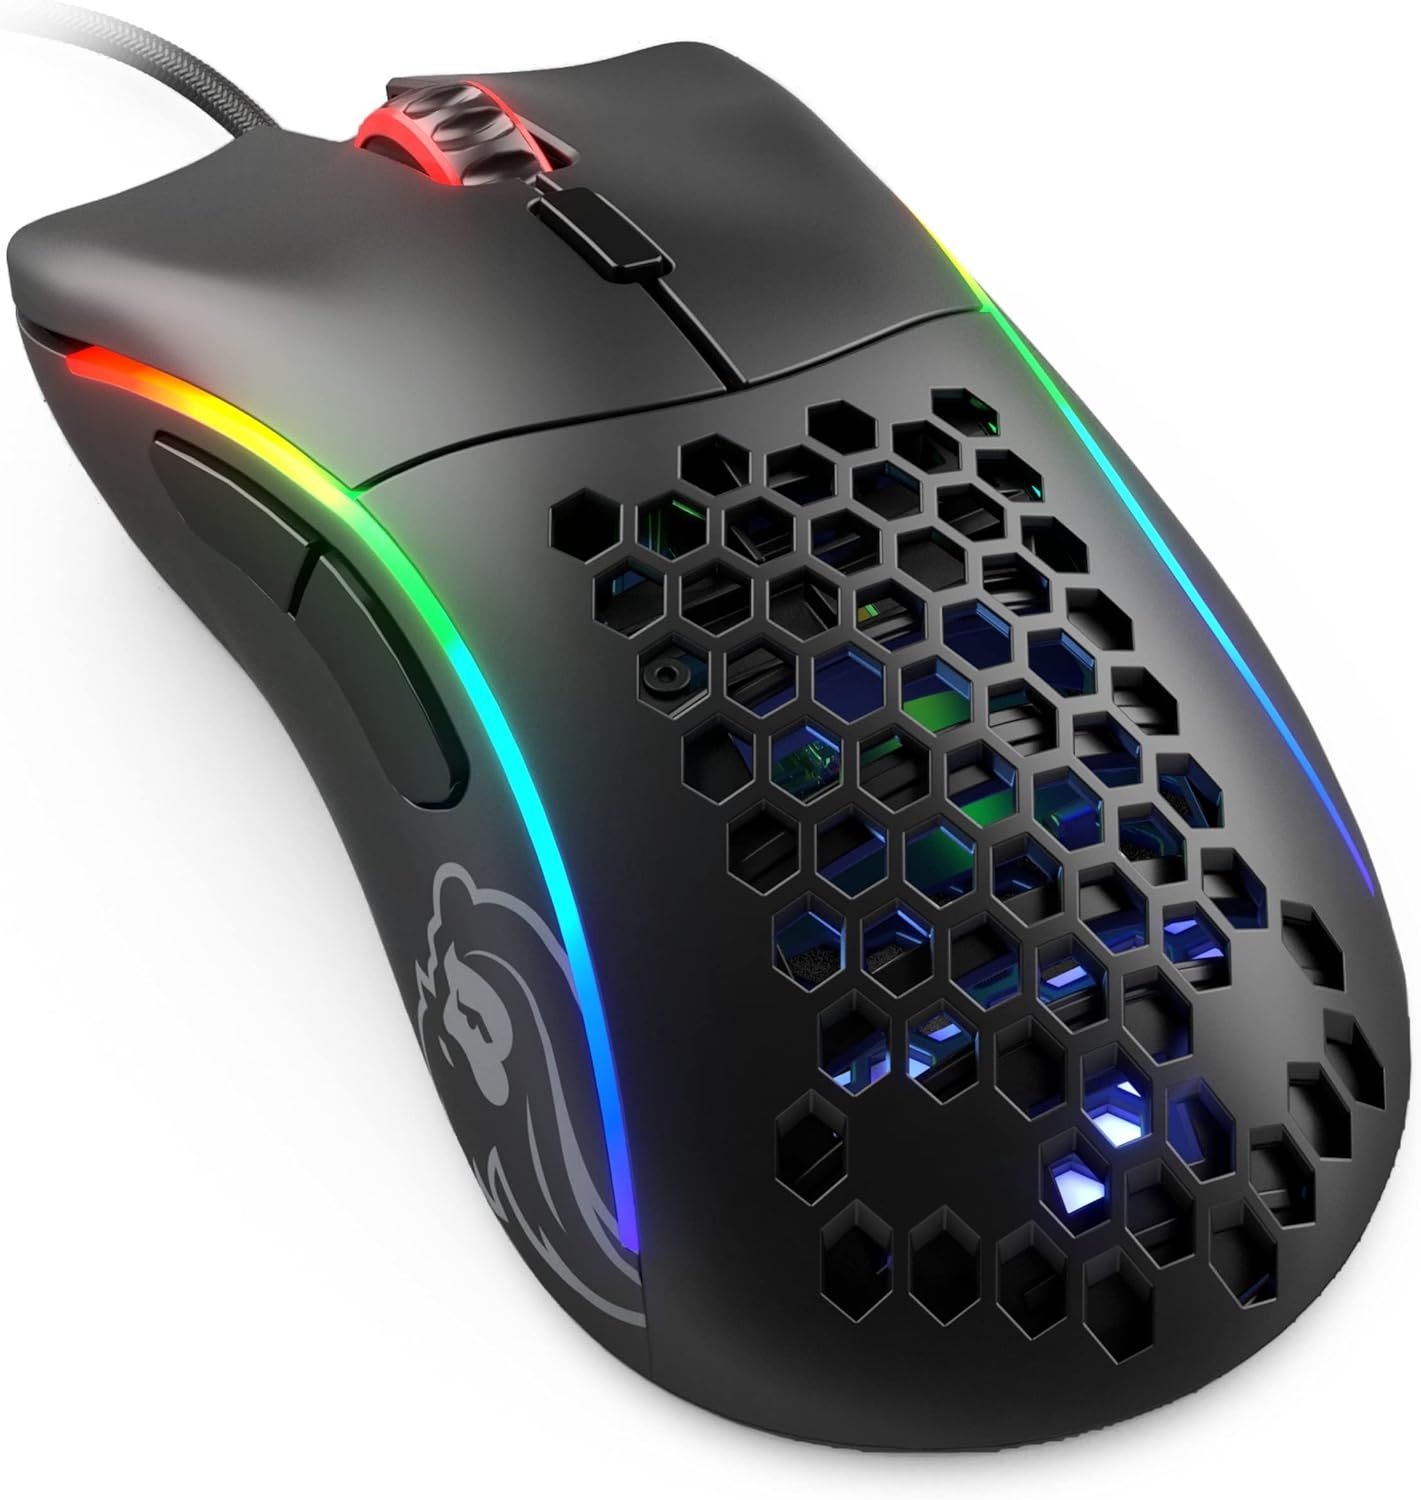 Glorious Model D- (Minus) Gaming Mouse